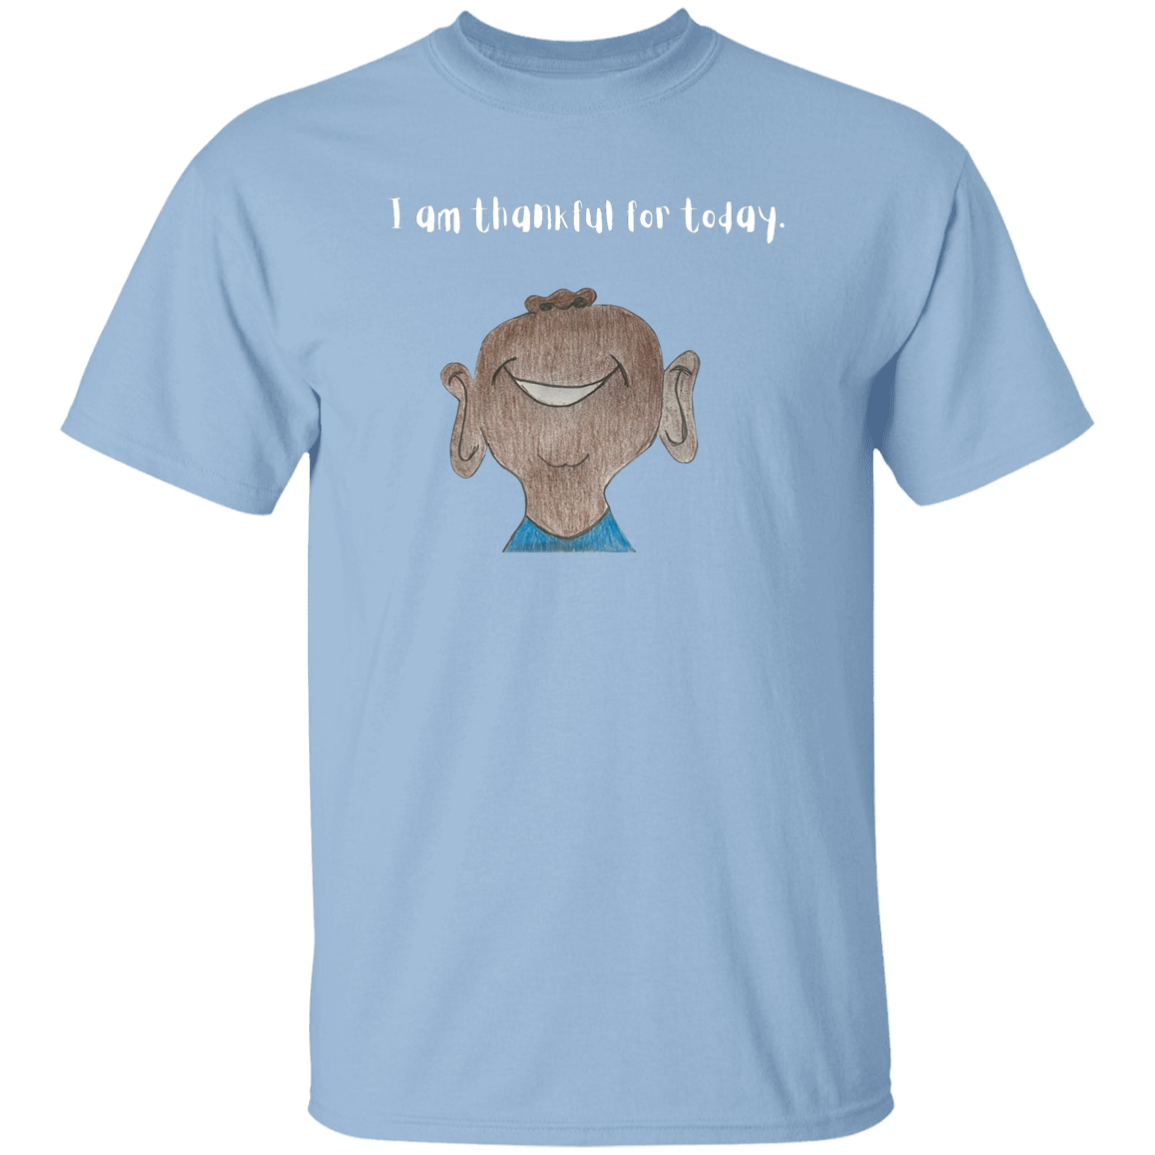 I am thankful for today Youth 5.3 oz 100% Cotton T-Shirt